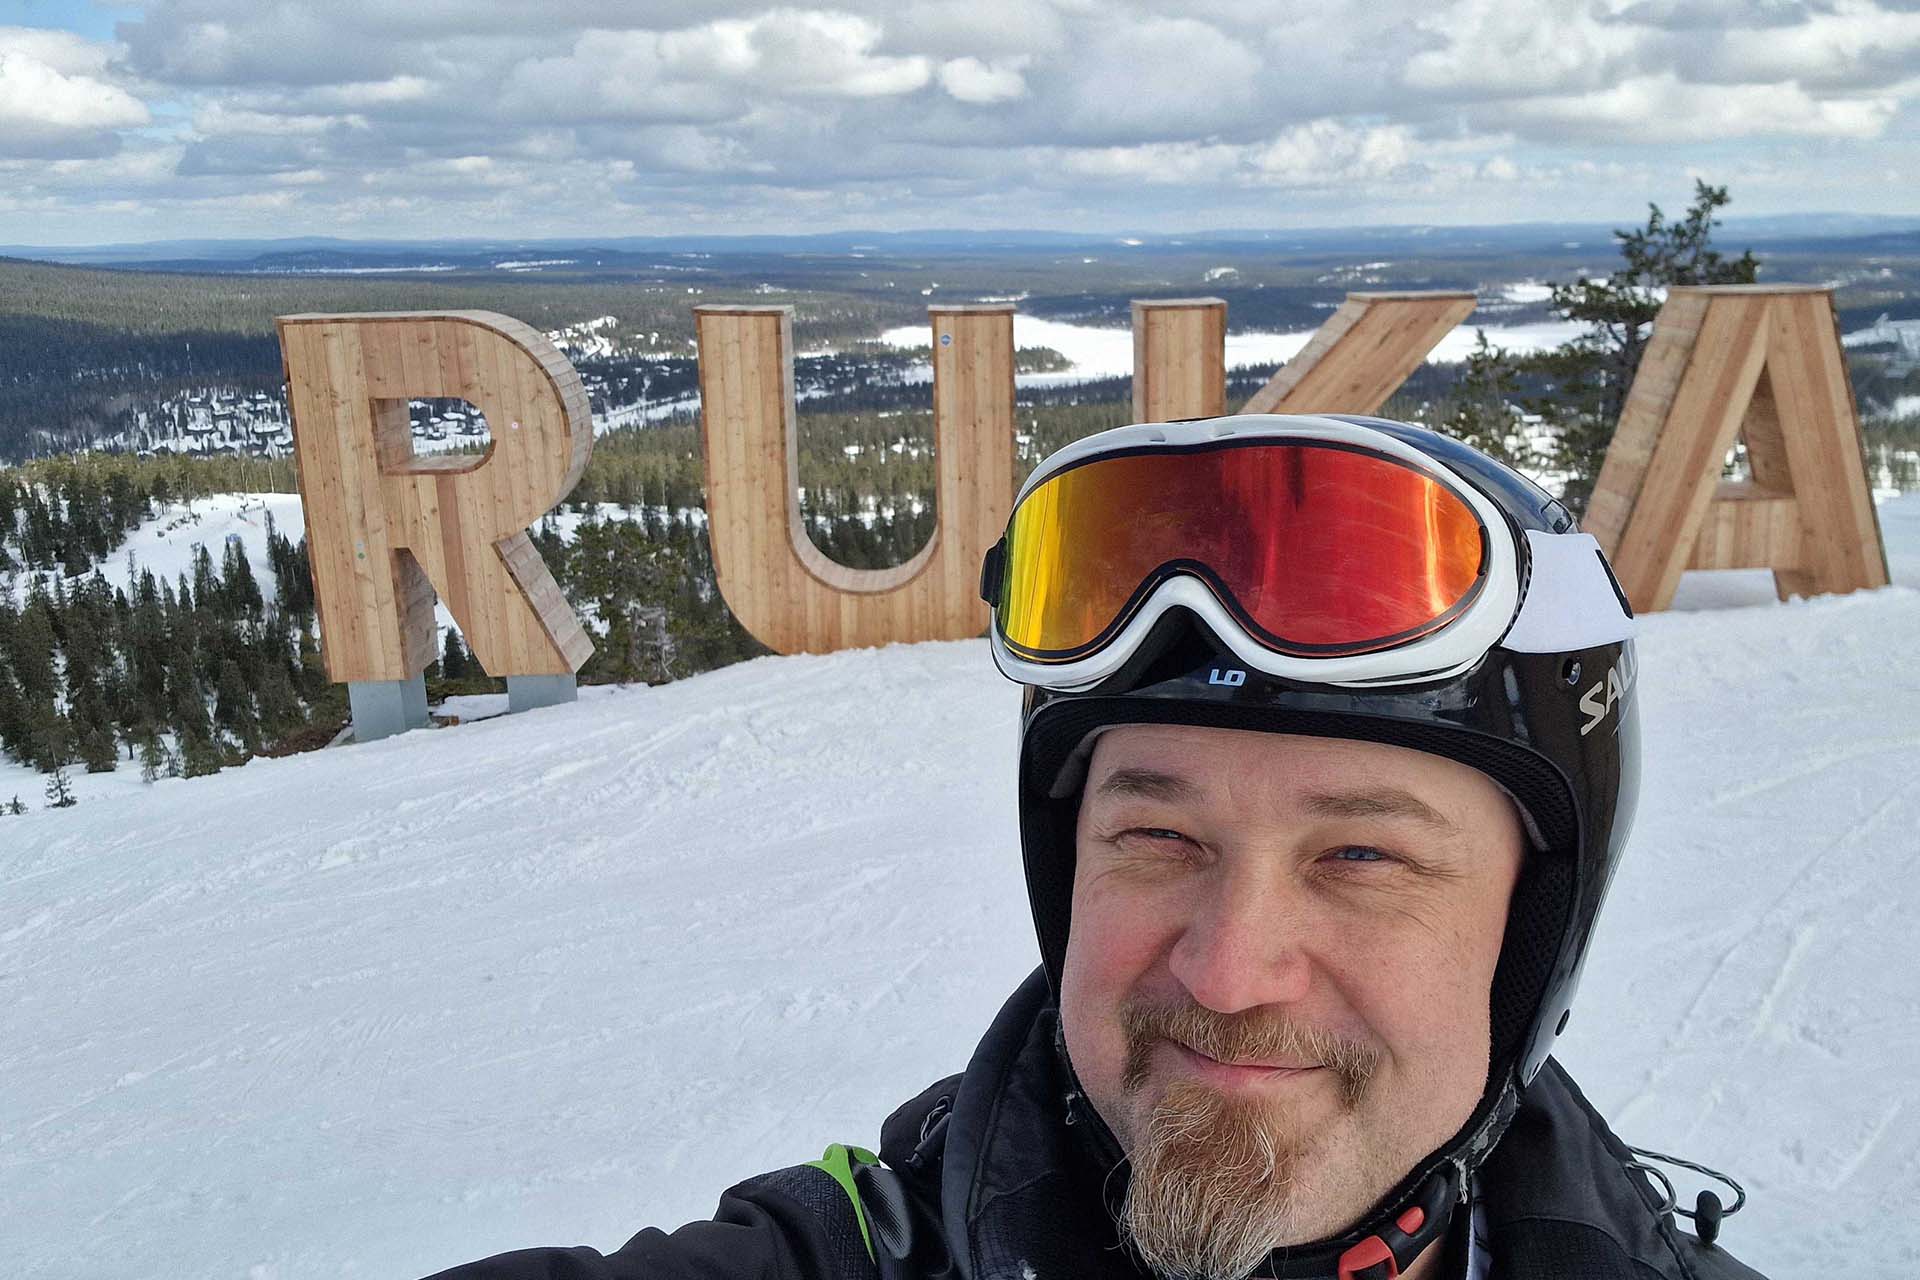  A smiling man with the Ruka sign and a snowy landscape in the background